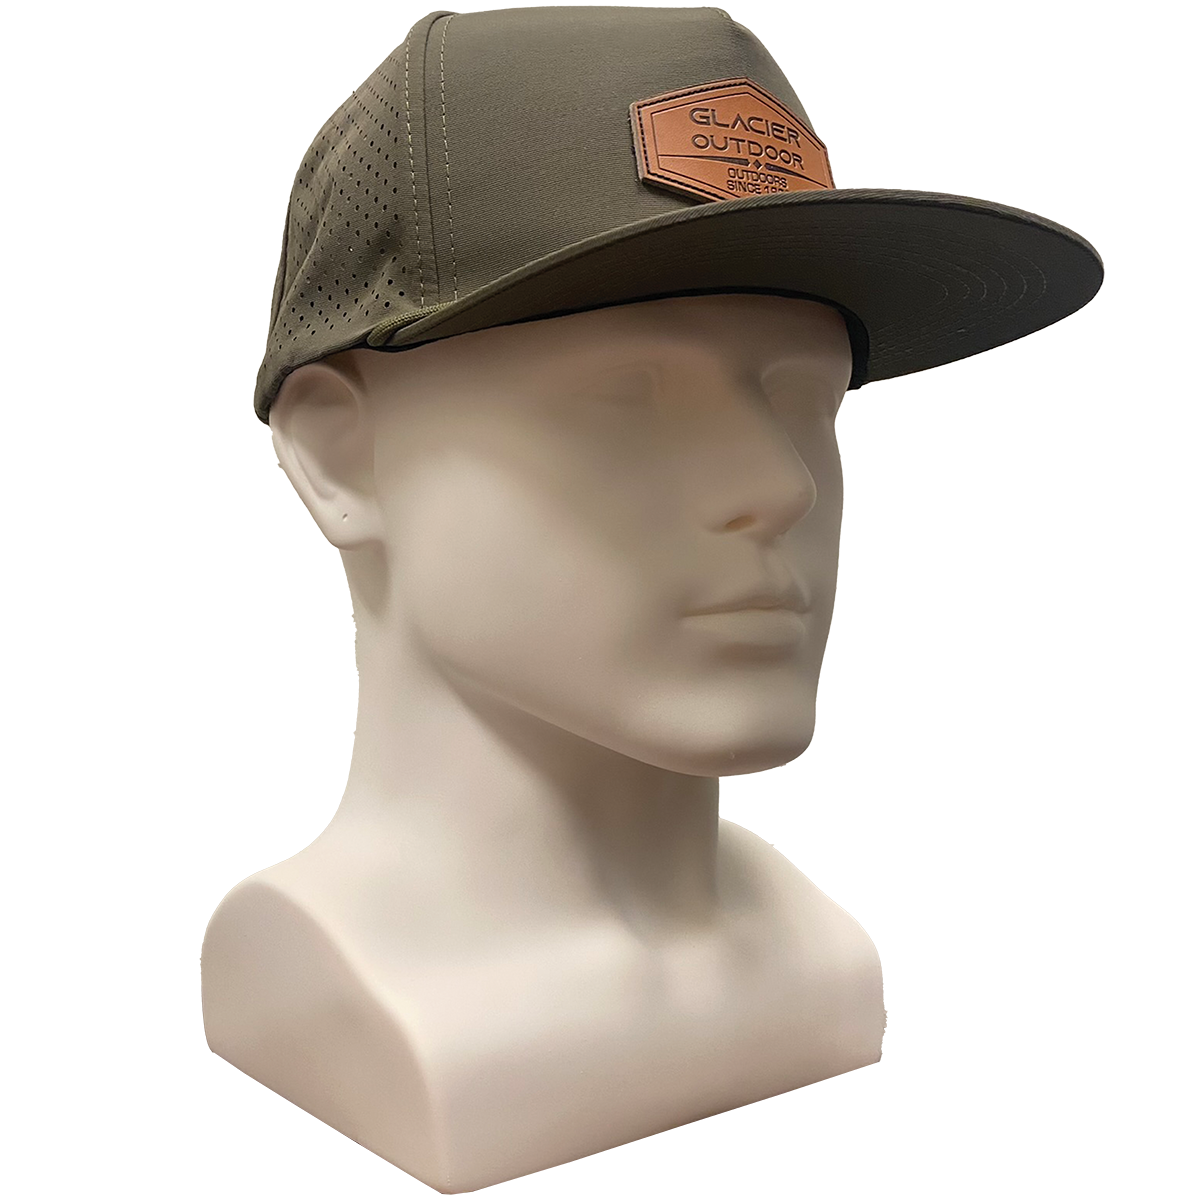 Glacier Outdoor Kingston Snap Back Hat in quick-dry Coyote Brown